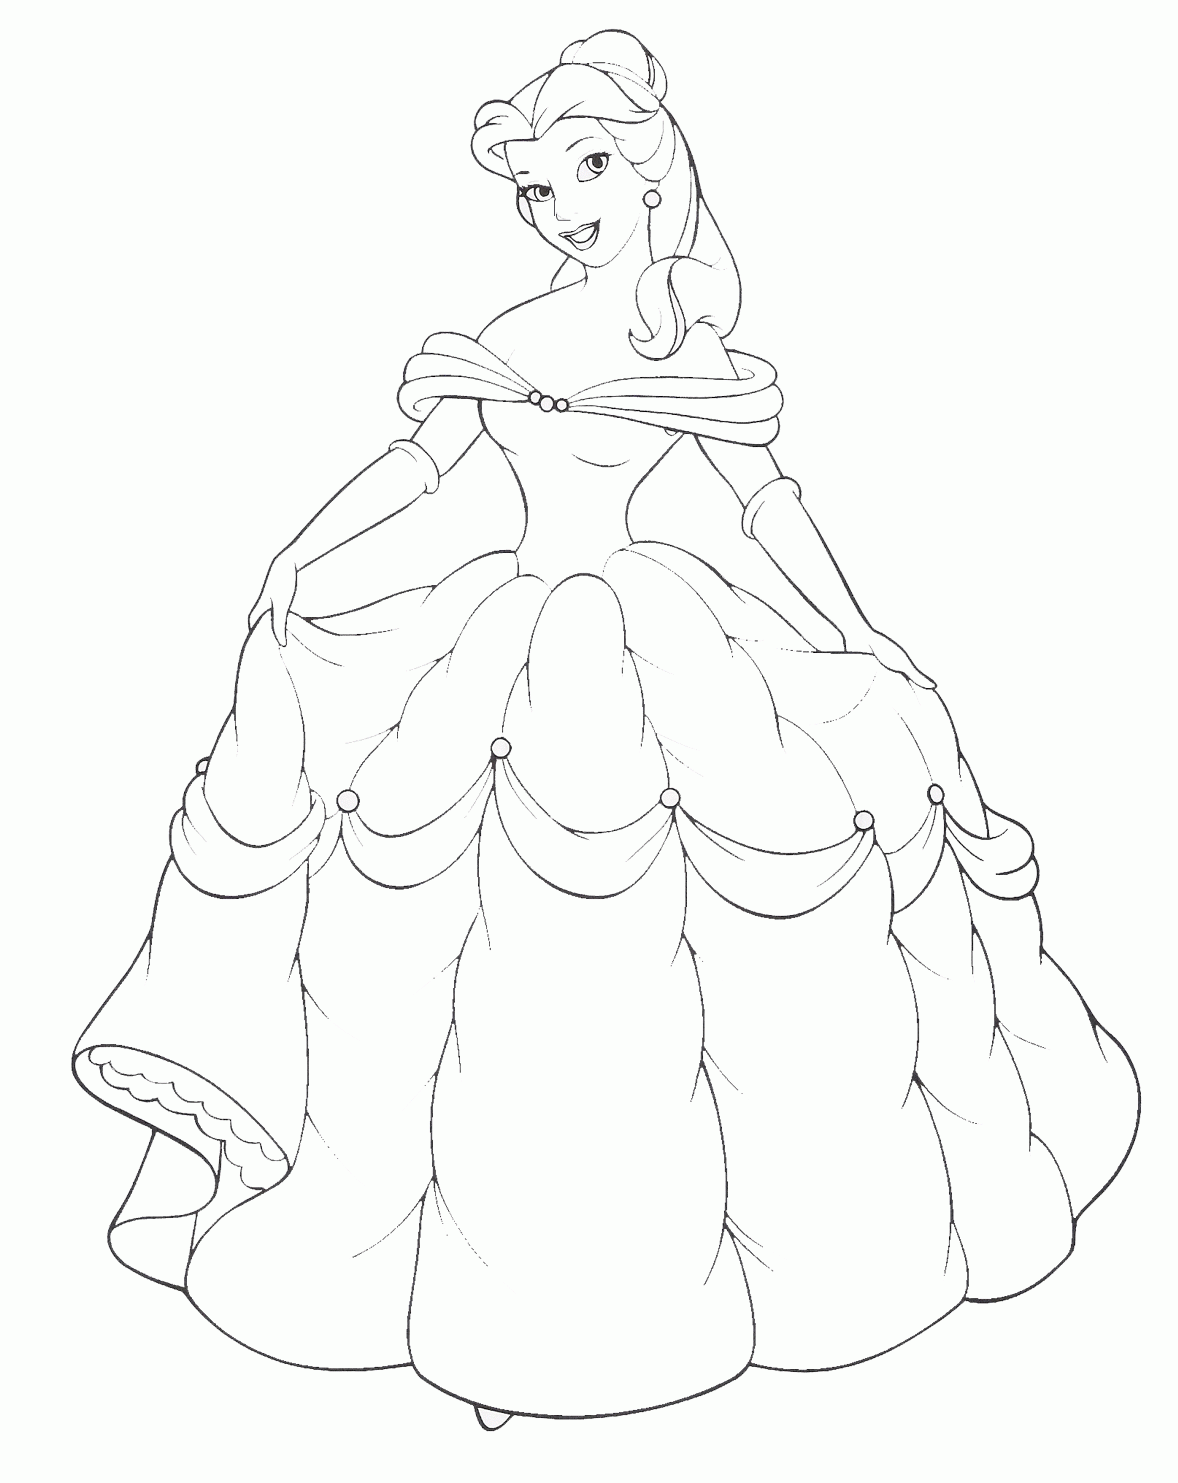 Princess Belle Coloring Pages Free - Free Coloring Sheets | Disney princess  coloring pages, Princess coloring pages, Disney princess colors